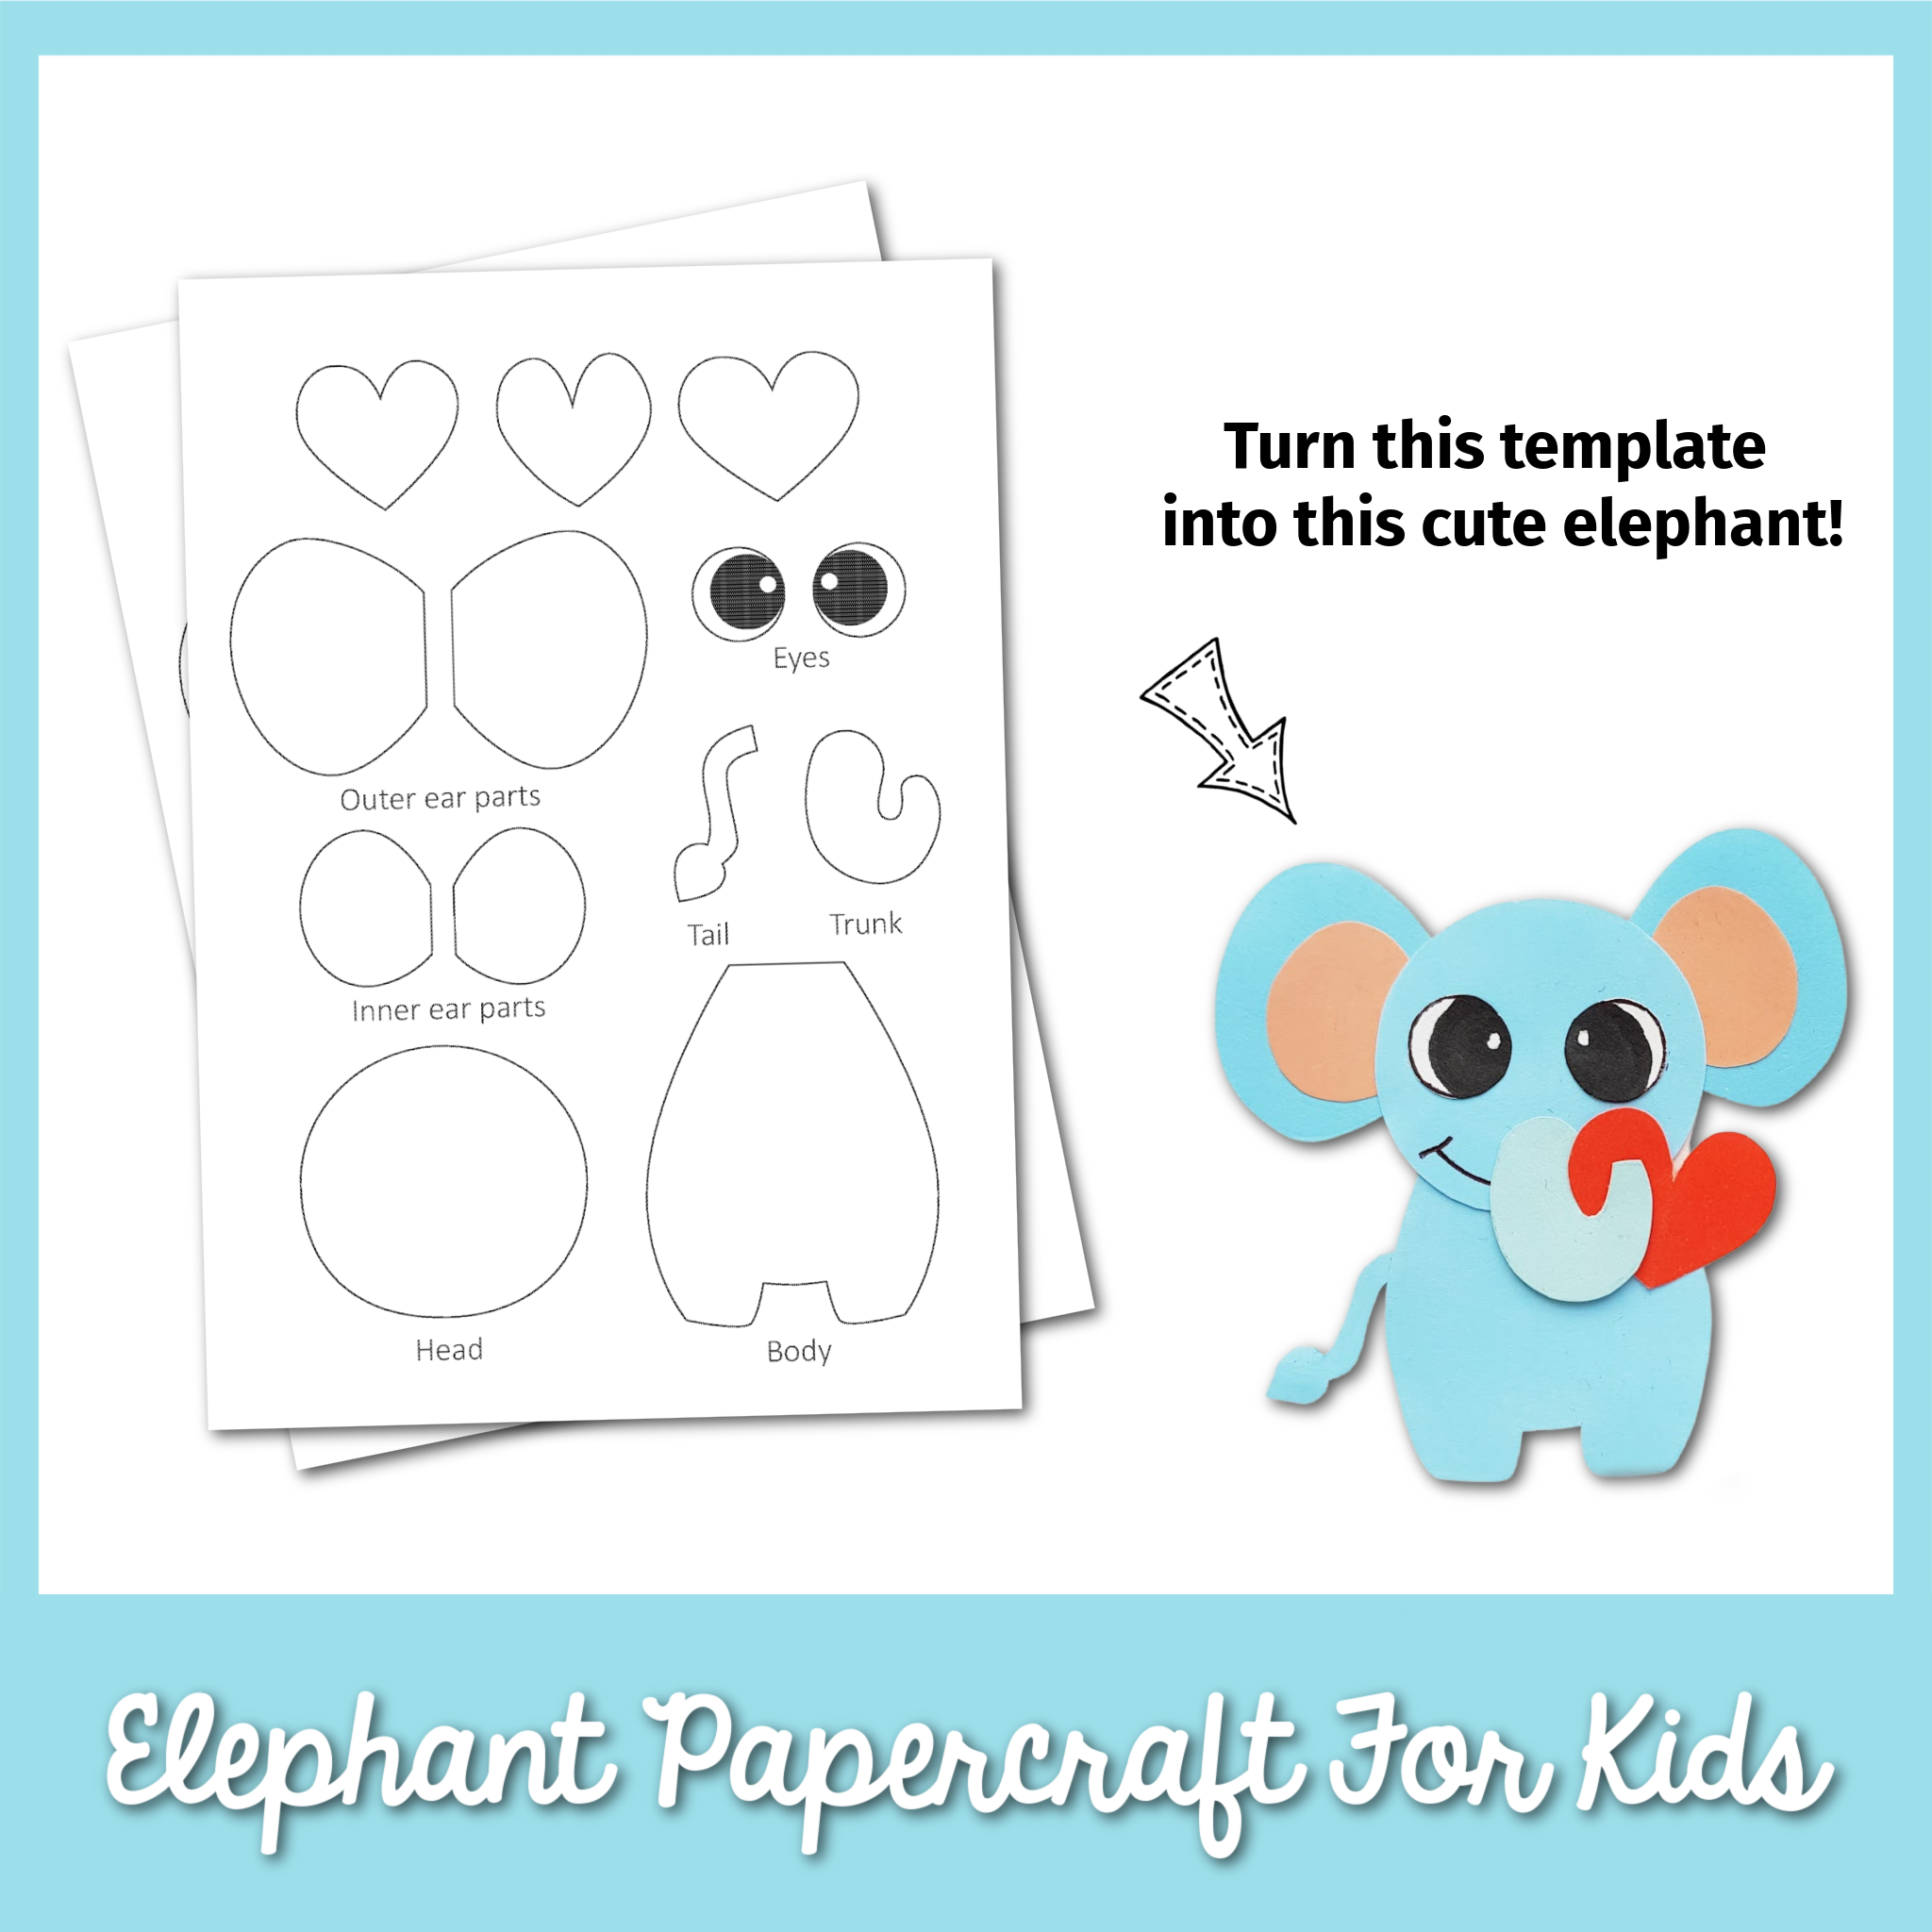 Elephant Papercraft for Kids Template